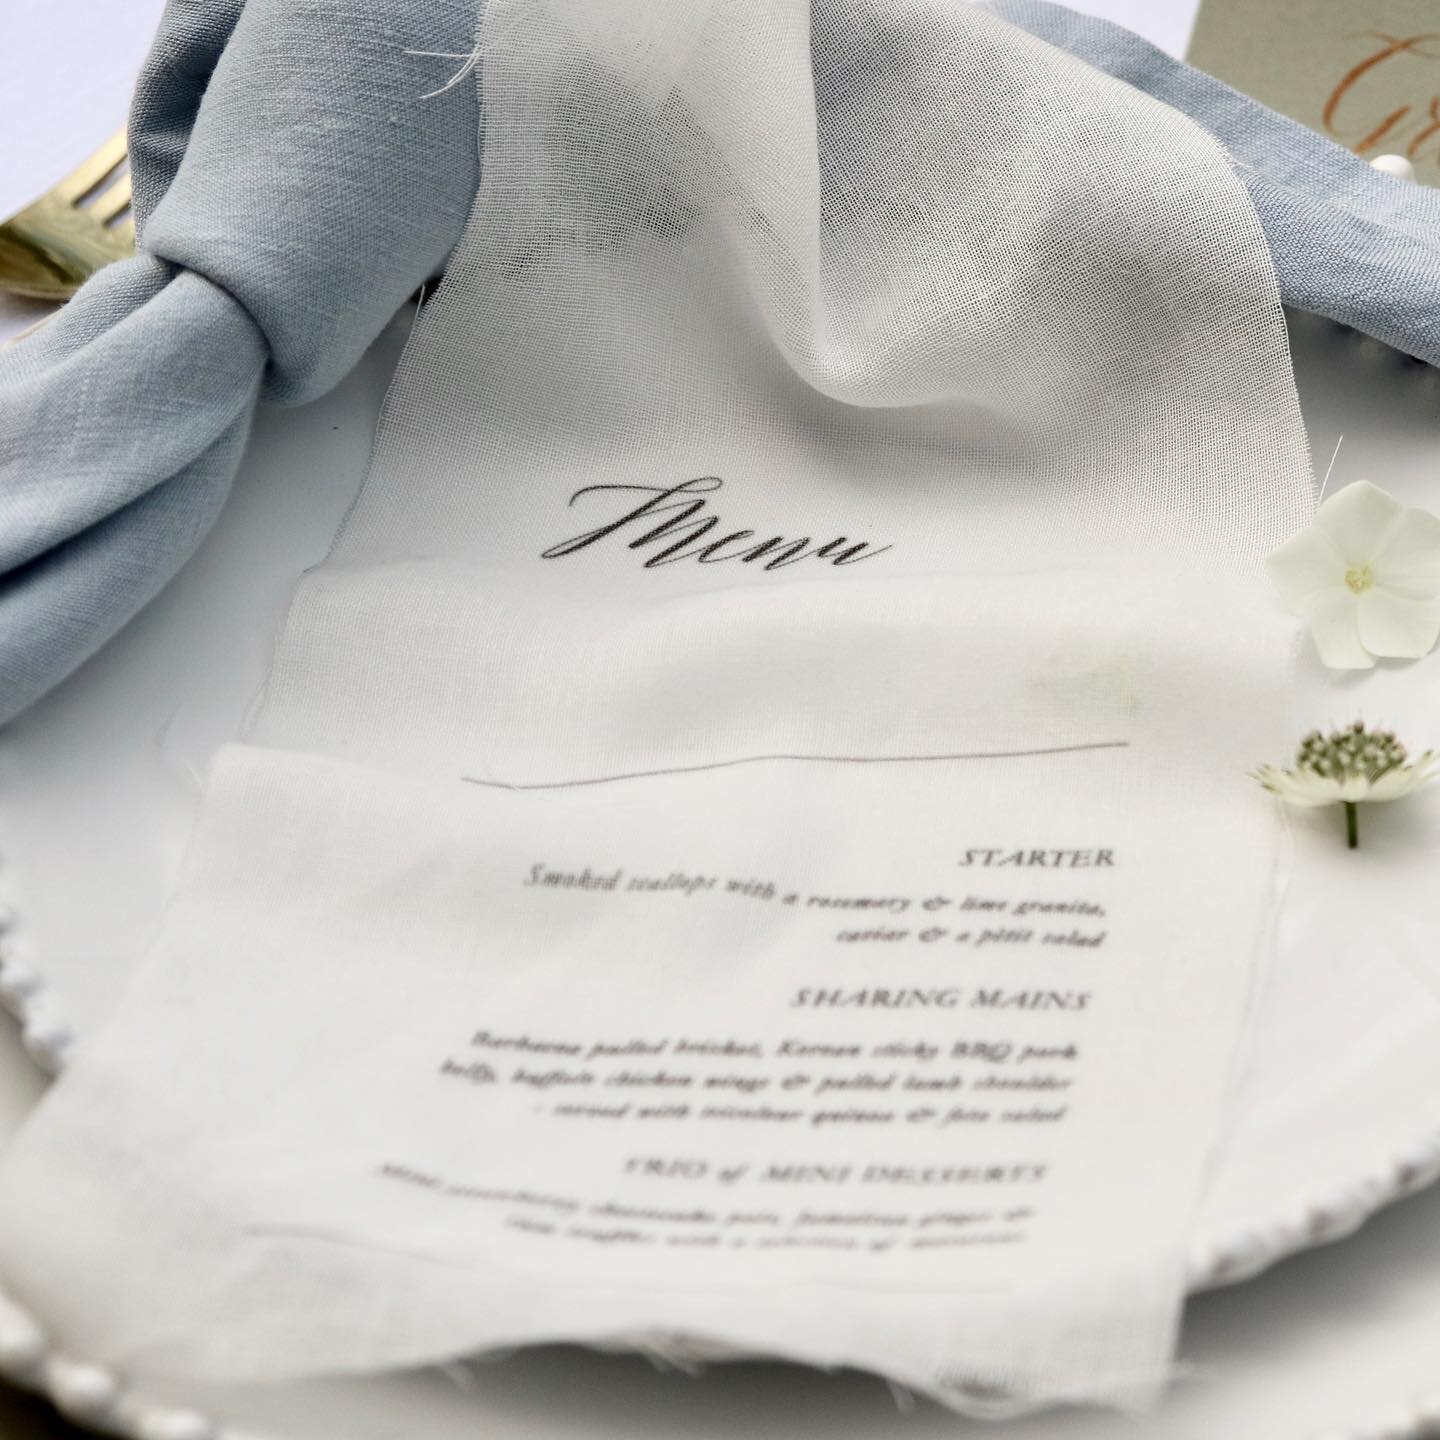 Menus don&rsquo;t have to be made of paper &hellip;. What do you think of these little napkin menus made out of soft muslin fabric?

Blue napkins and cutlery by @ambiencebuckinghamshire 

#fabricmenus #fabric #organicwedding #organicweddings #greenwe